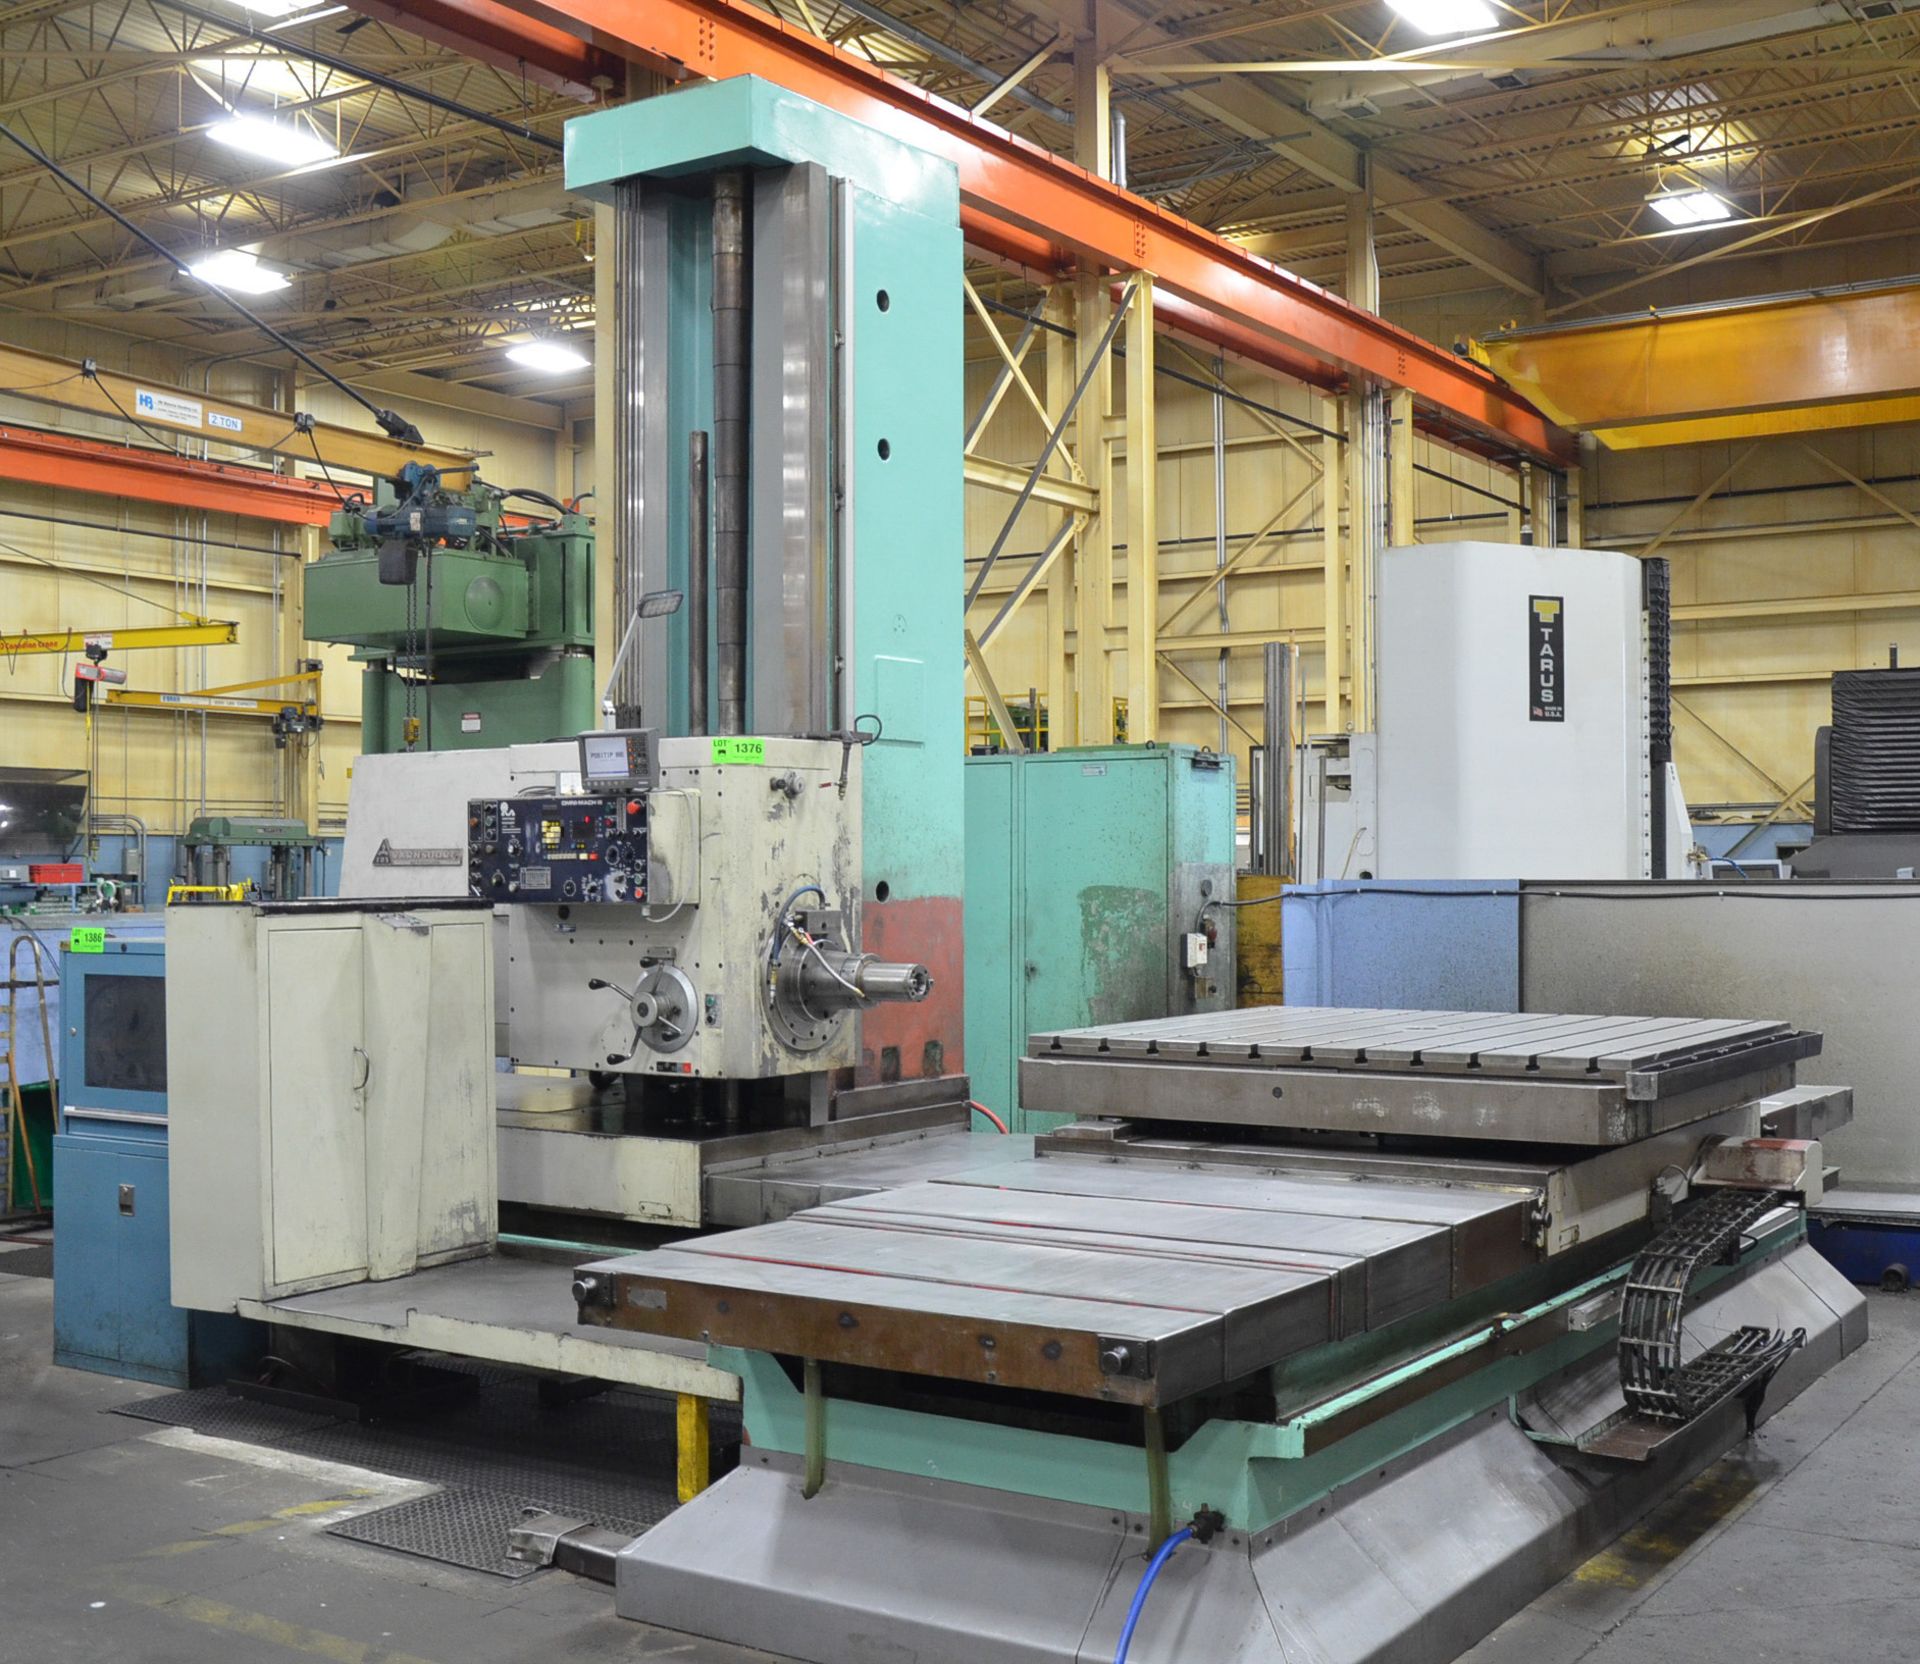 TOS WHN-13-4-A TABLE-TYPE HORIZONTAL BORING MILL WITH 5" SPINDLE, 63"X70.5" T-SLOT ROTARY TABLE, - Image 2 of 10